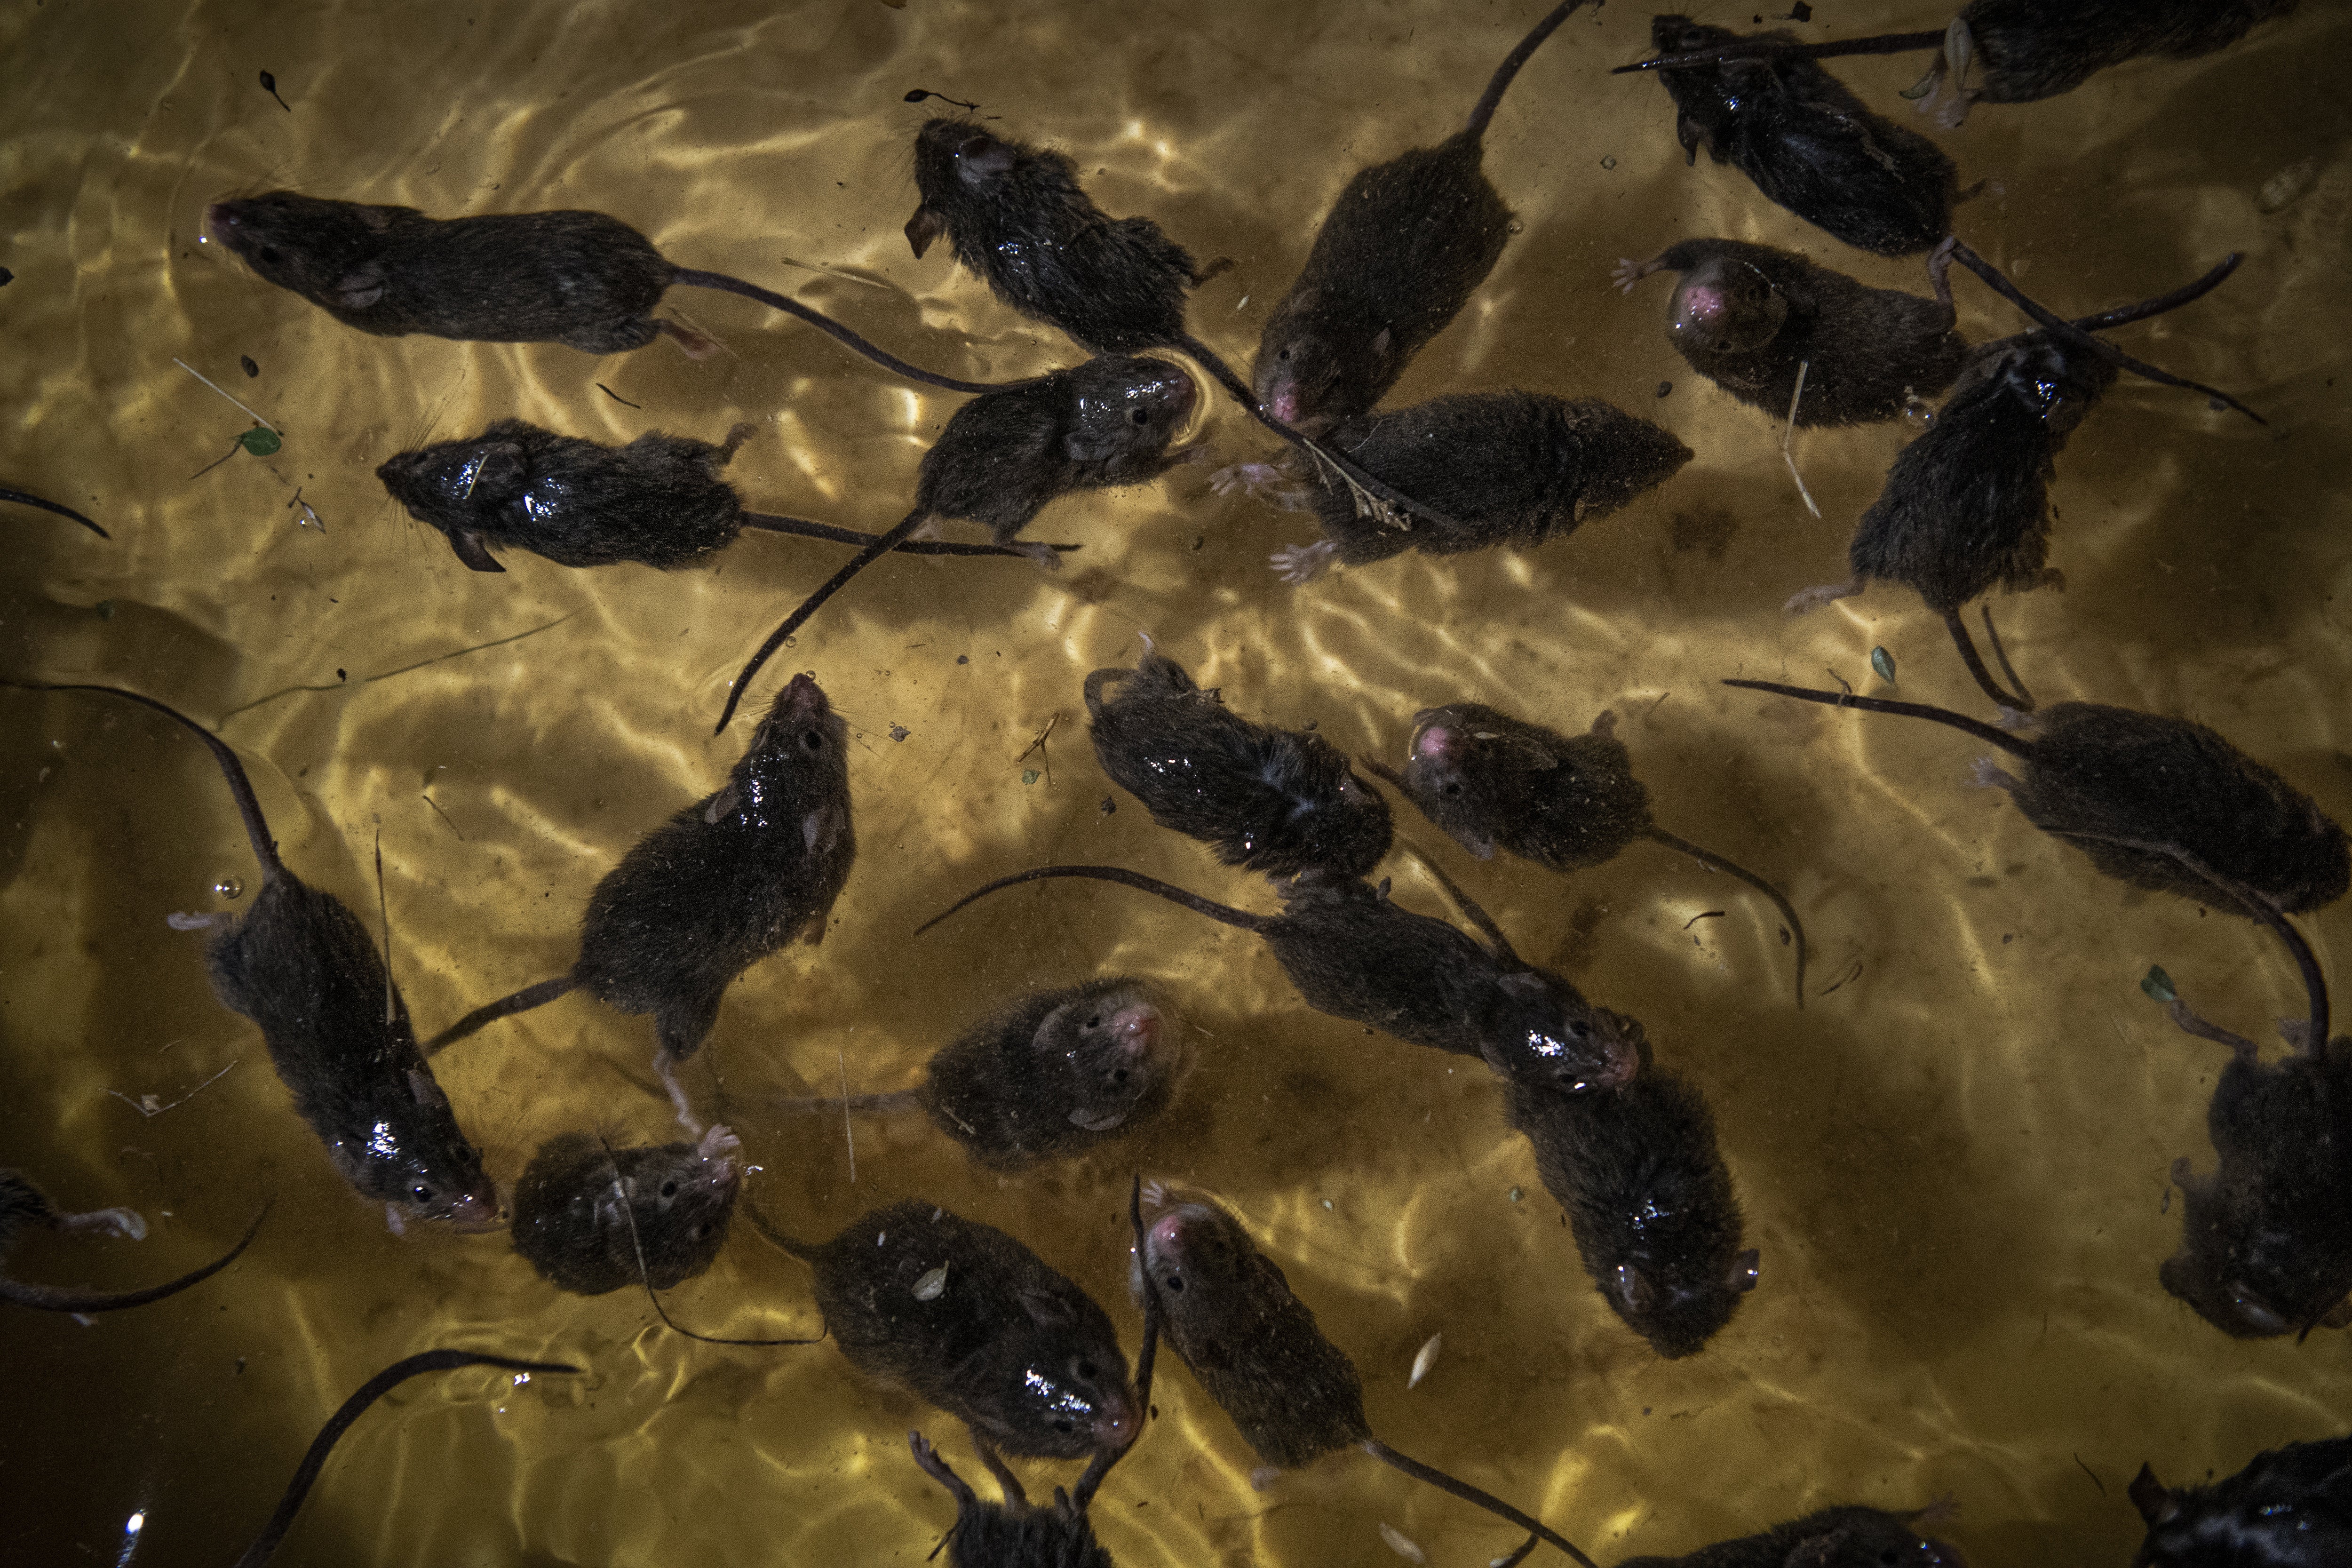 Dead and drowning mice float in a homemade trap near Dubbo, New South Wales, Australia on 26 May 2021